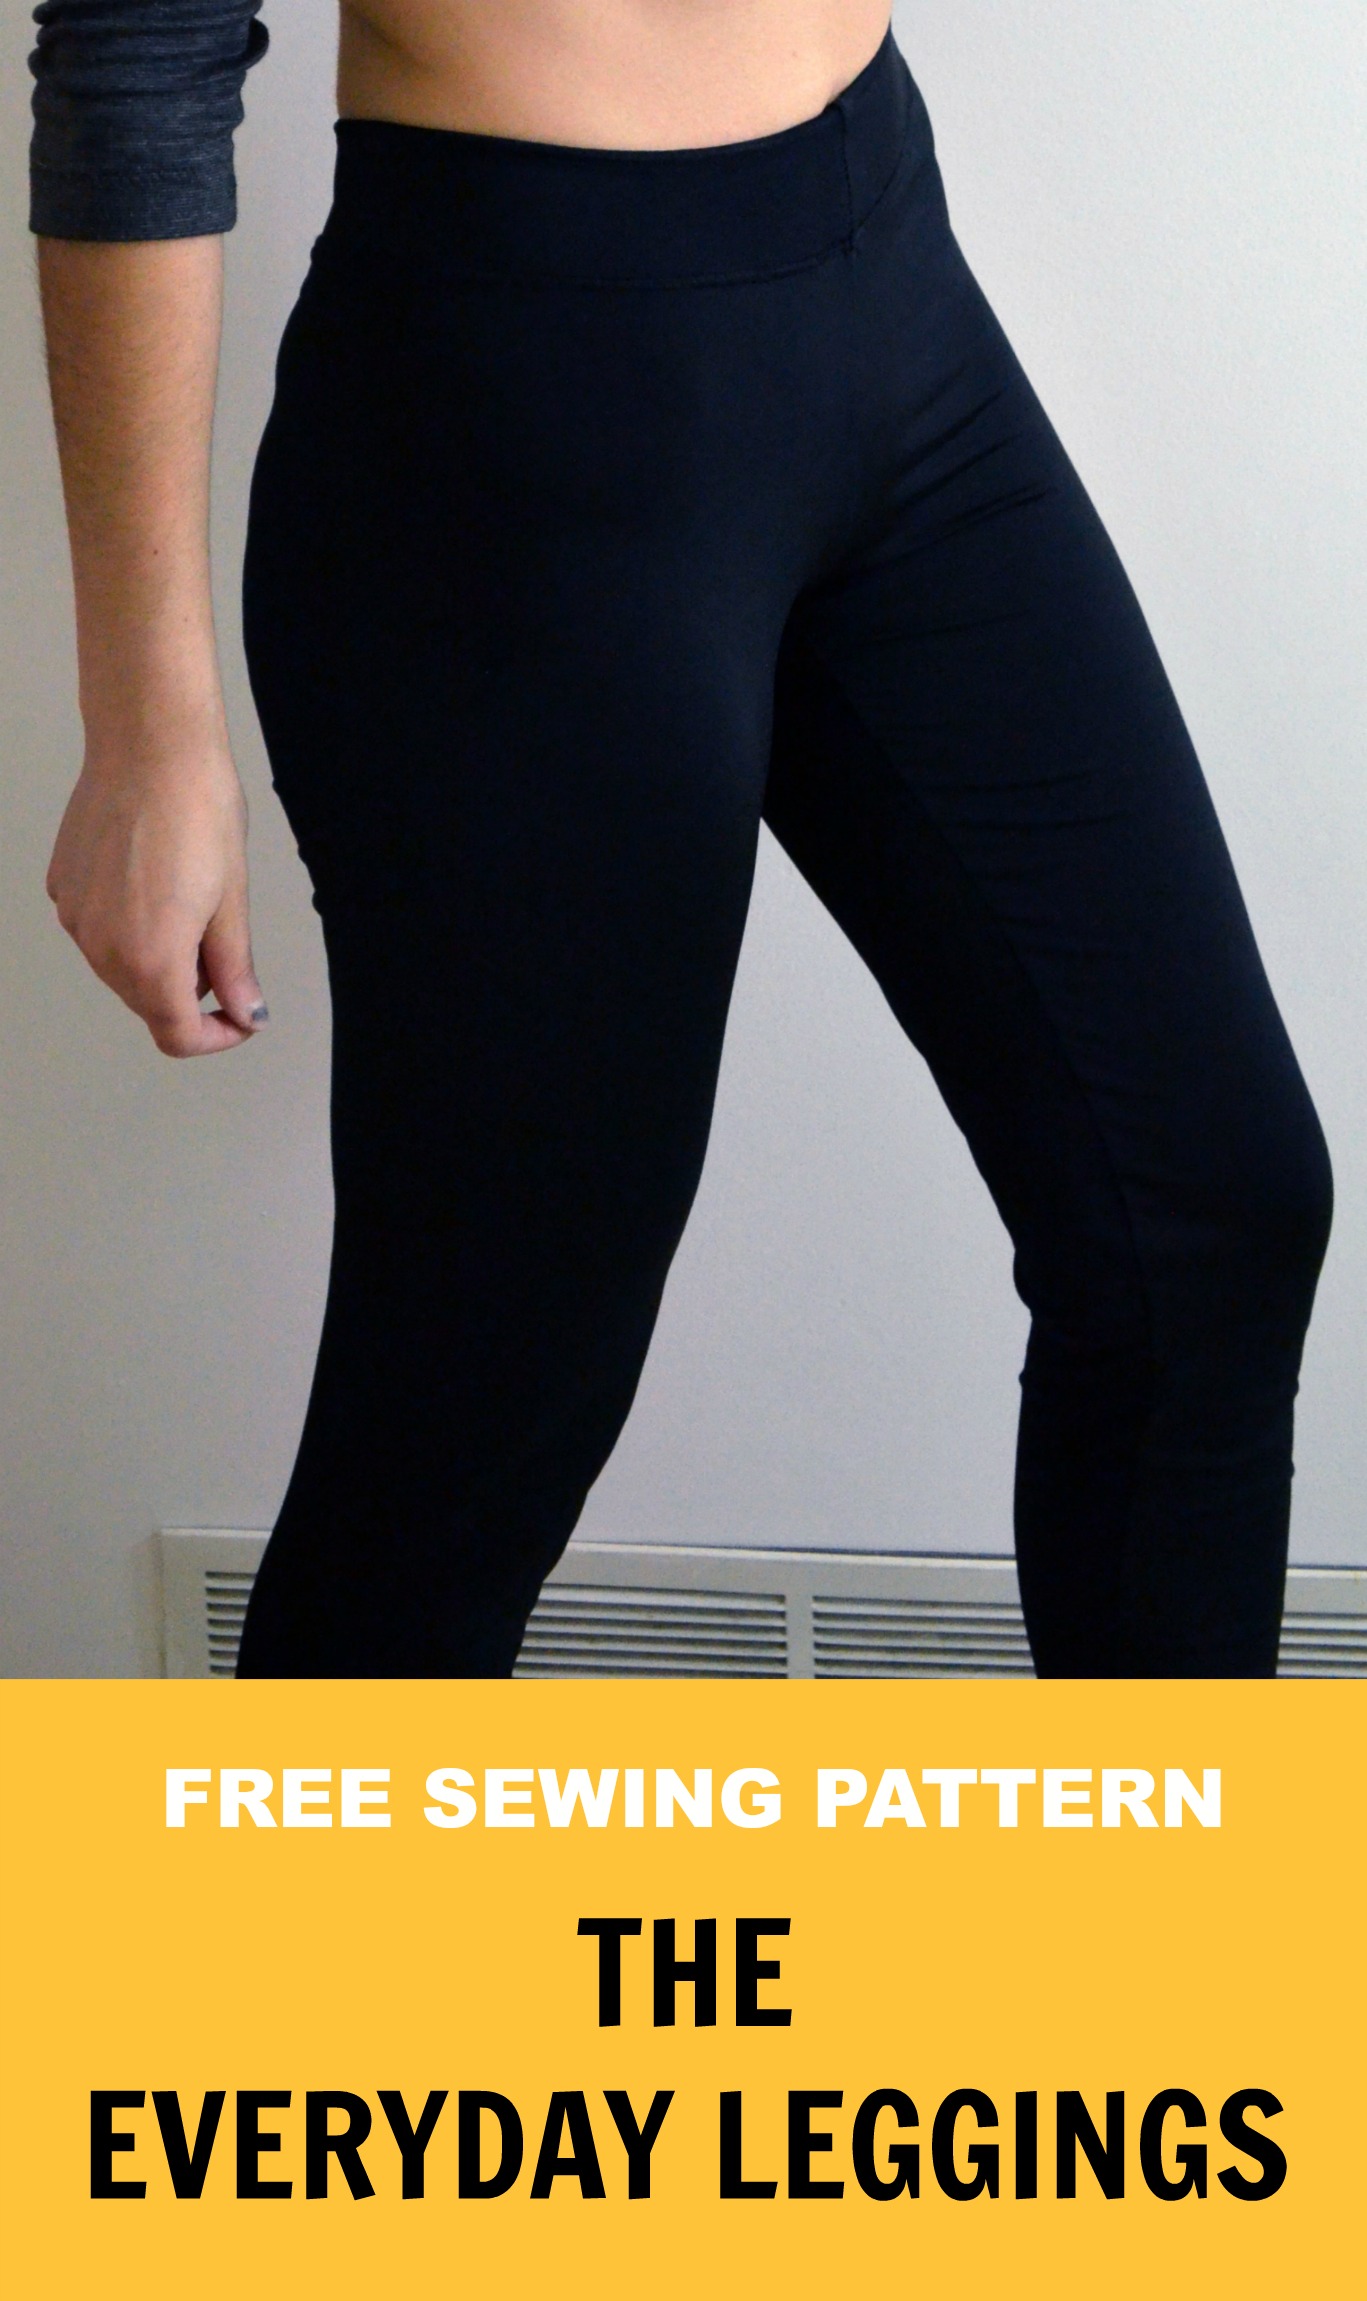 FREE SEWING PATTERN: Easy Everyday Leggings  On the Cutting Floor:  Printable pdf sewing patterns and tutorials for women